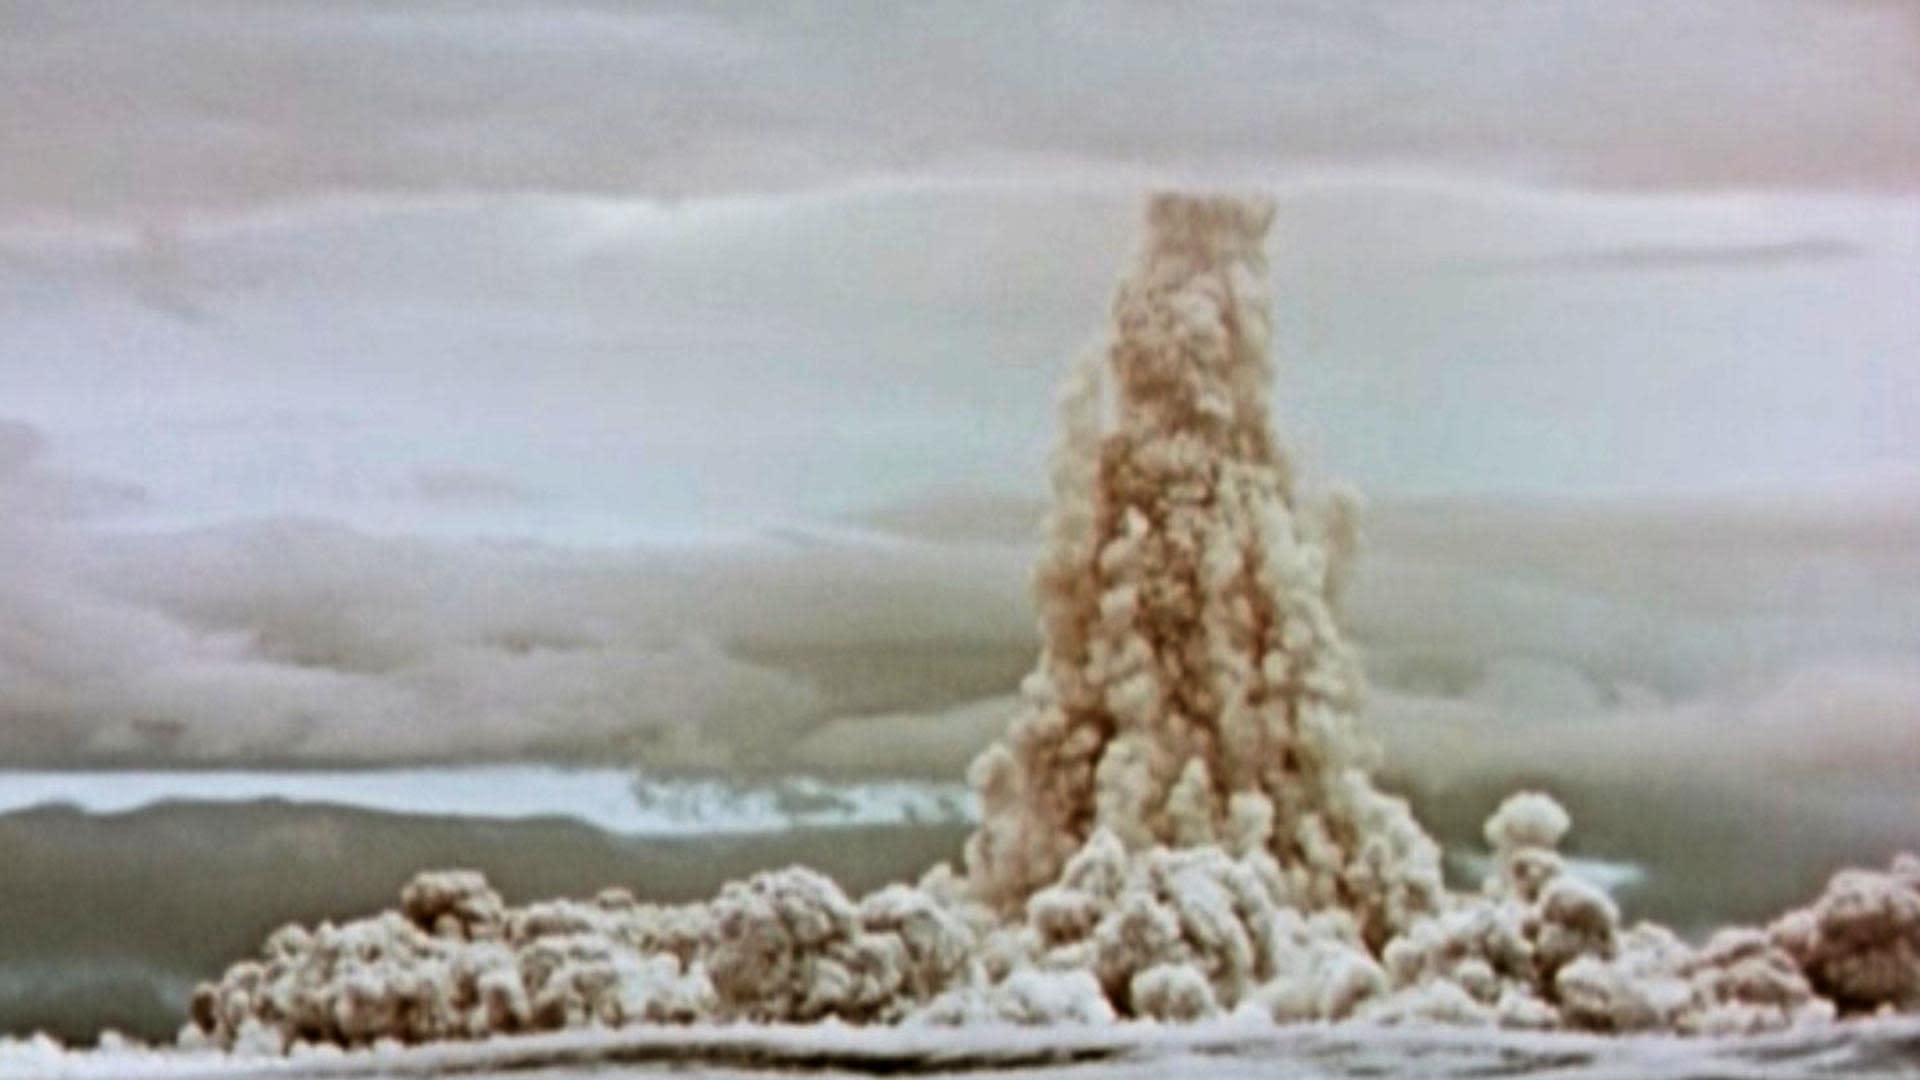 Footage released of world’s largest ever nuclear explosion